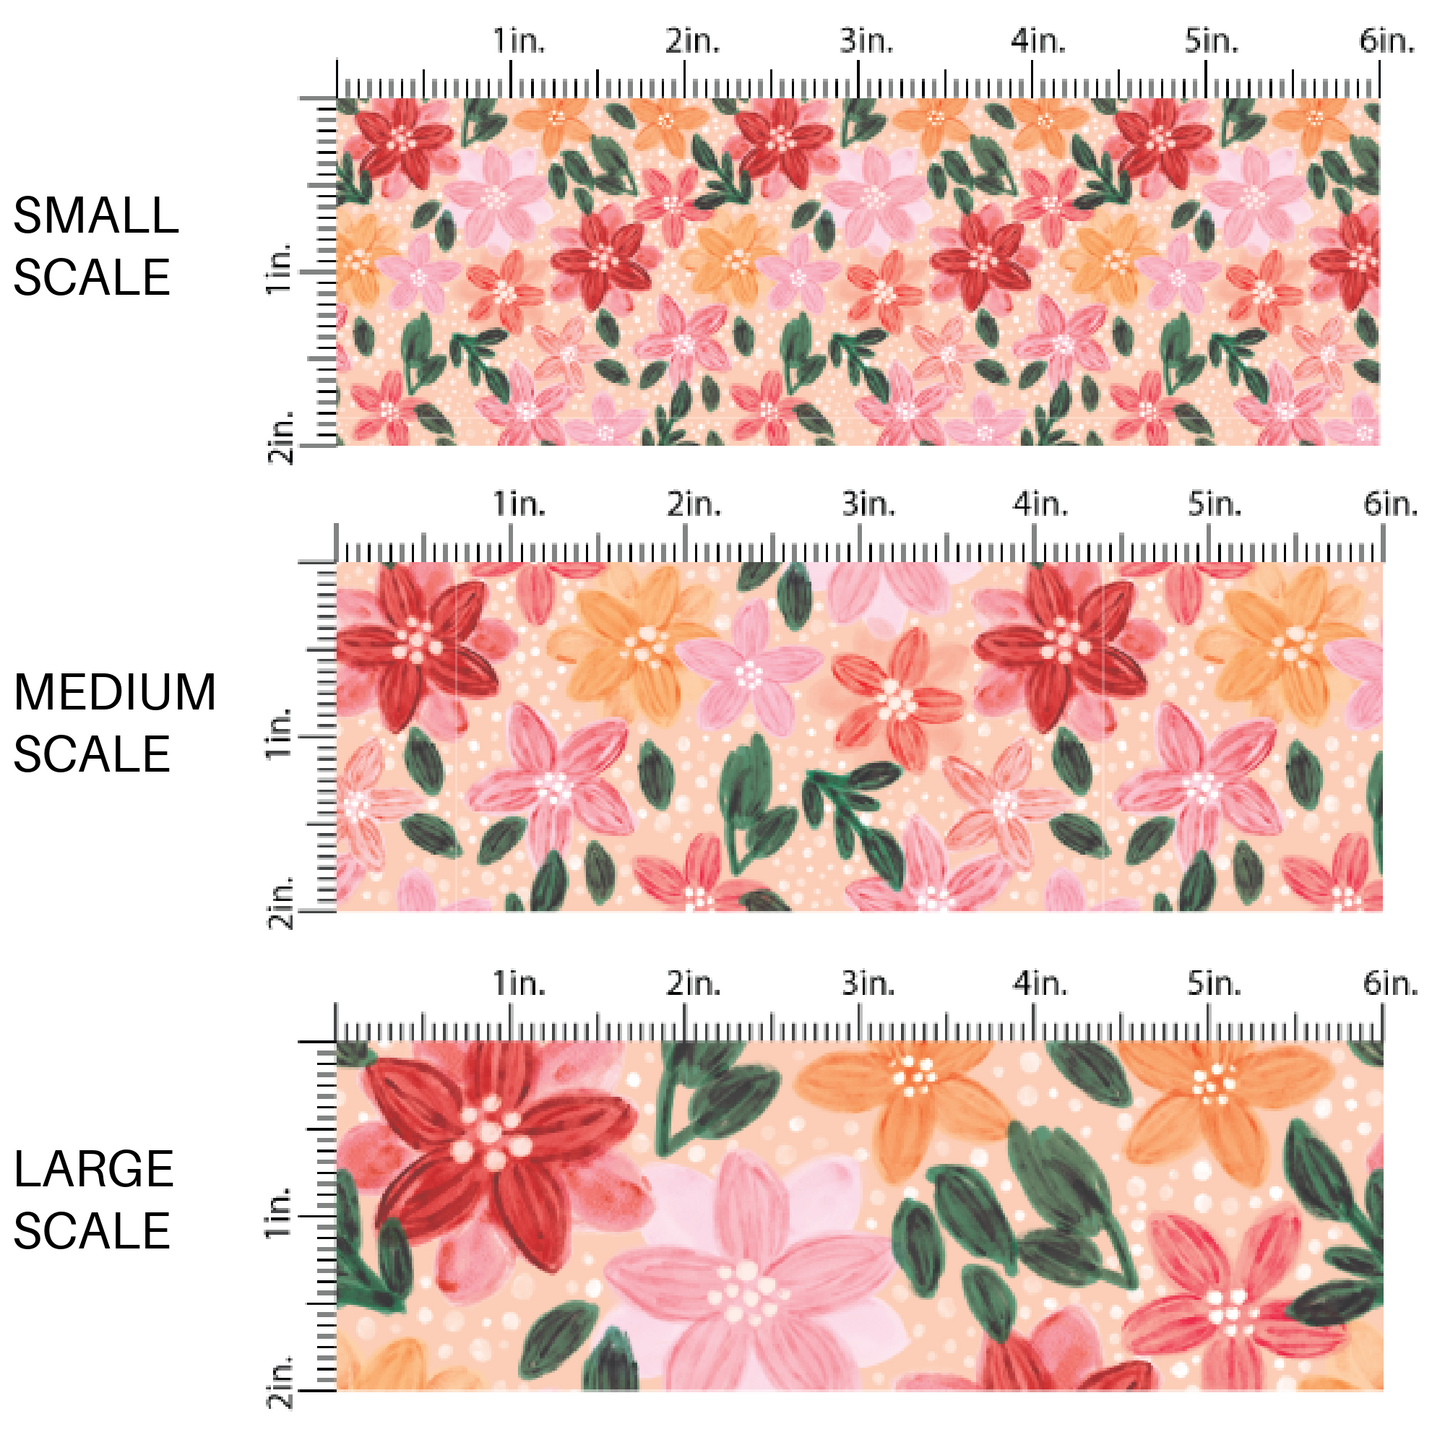 Pale peach fabric with colorful painted poinsettias scaled to small, medium, or large size.